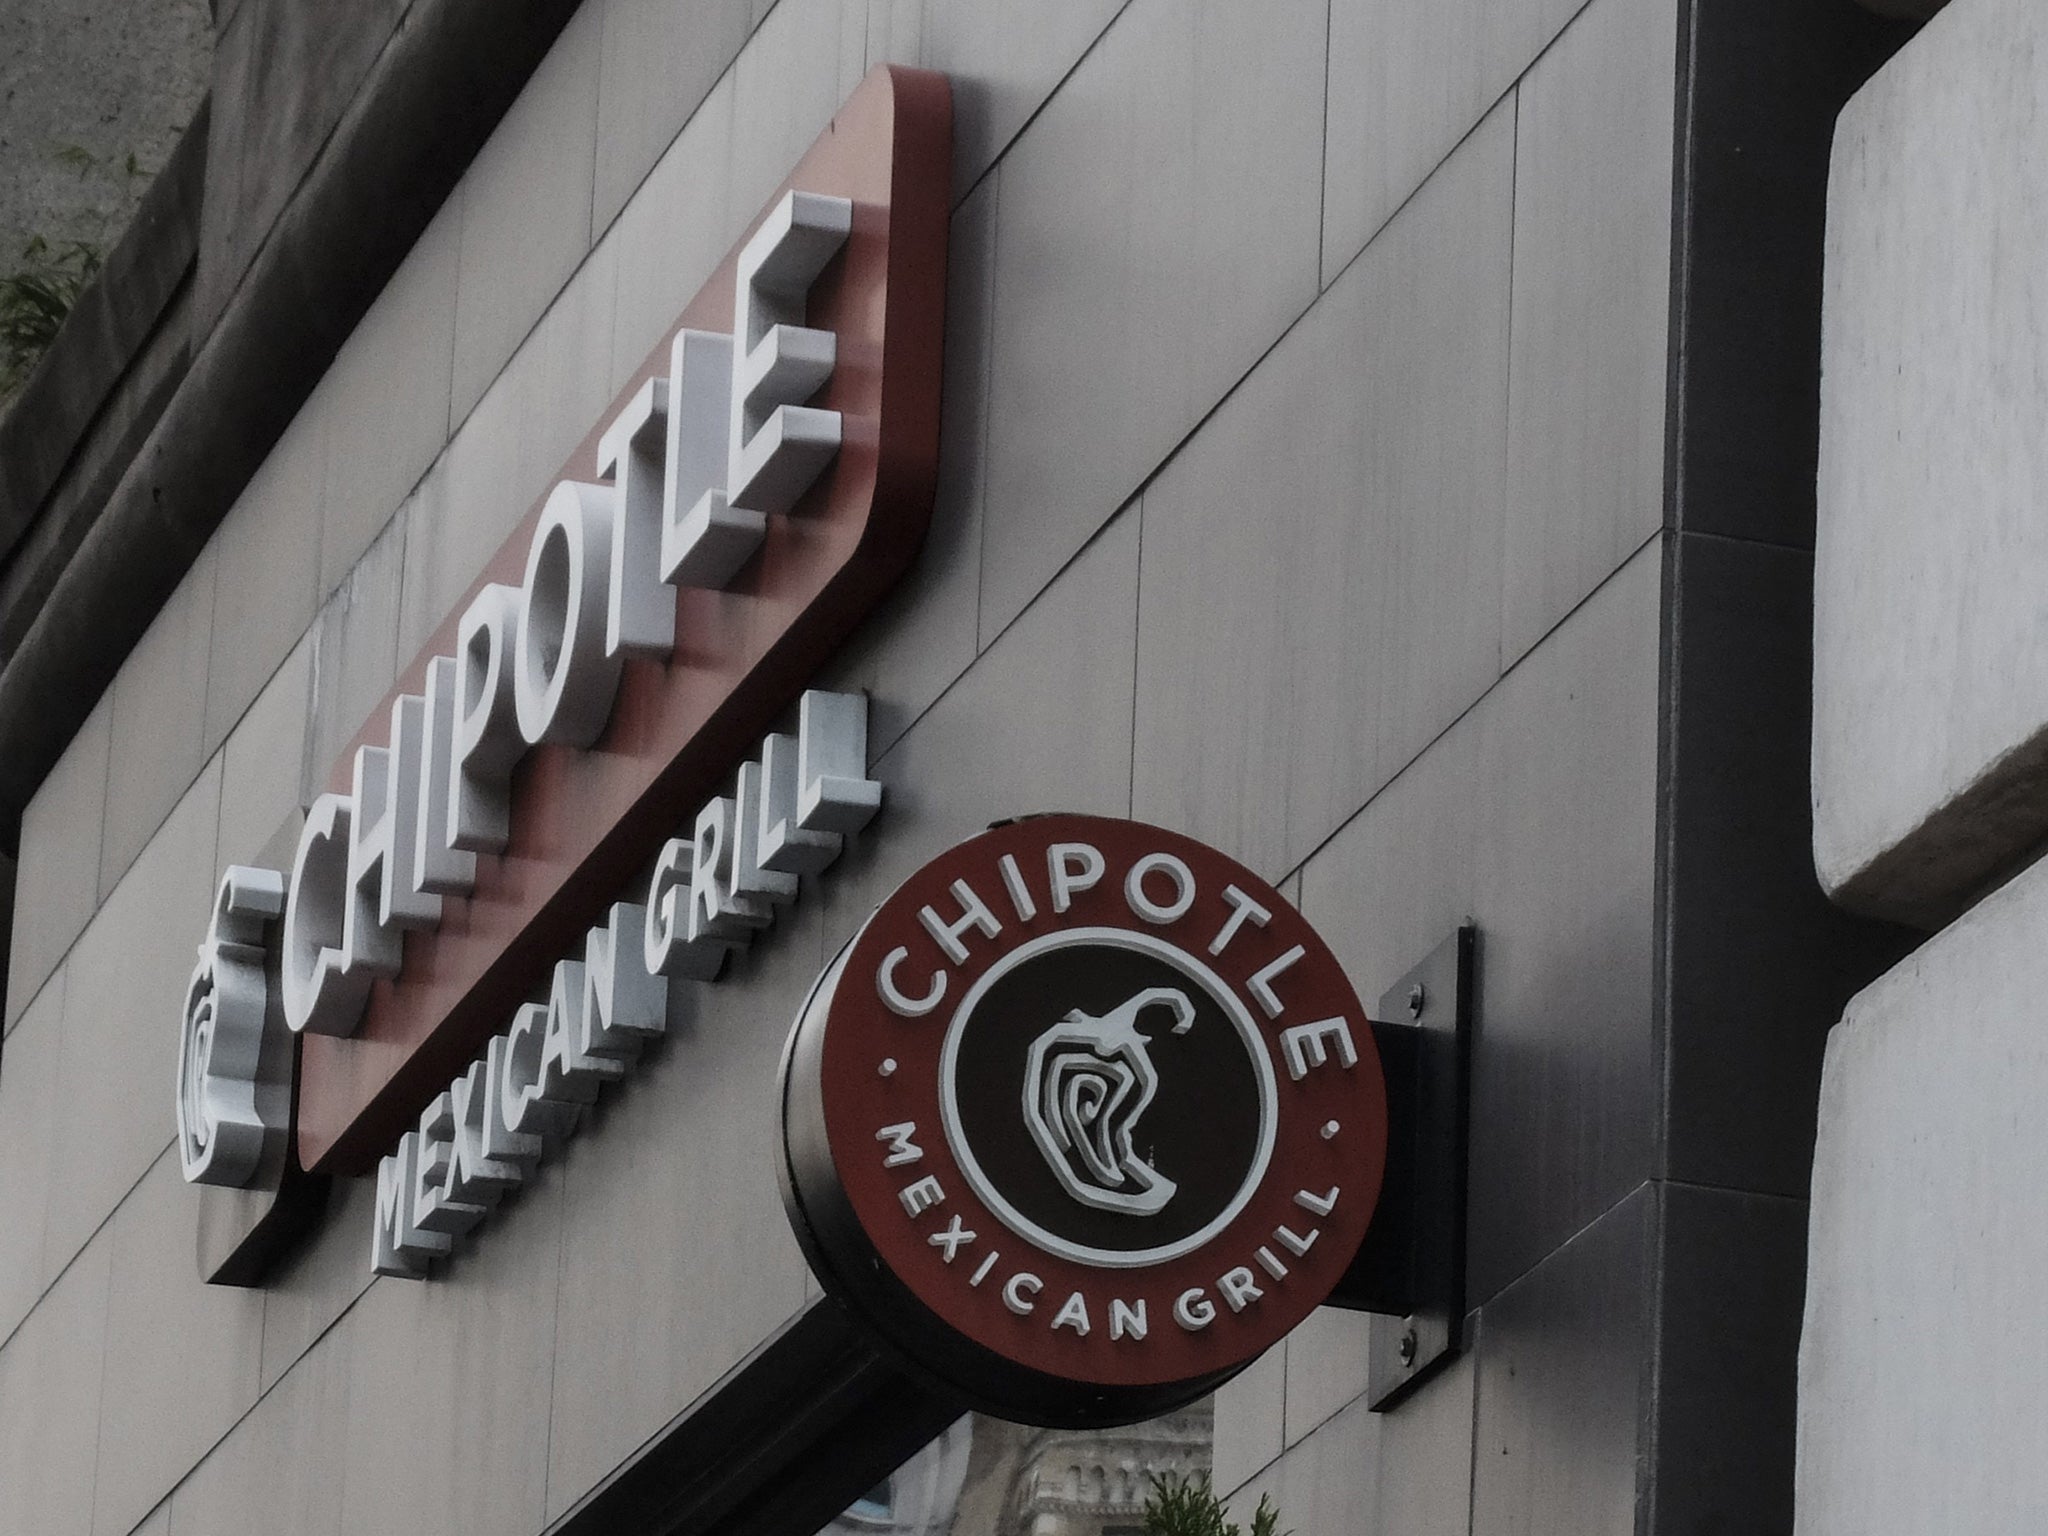 20 cases of E.Coli, thought to have originated from Chipotle restaurants, are being investigated